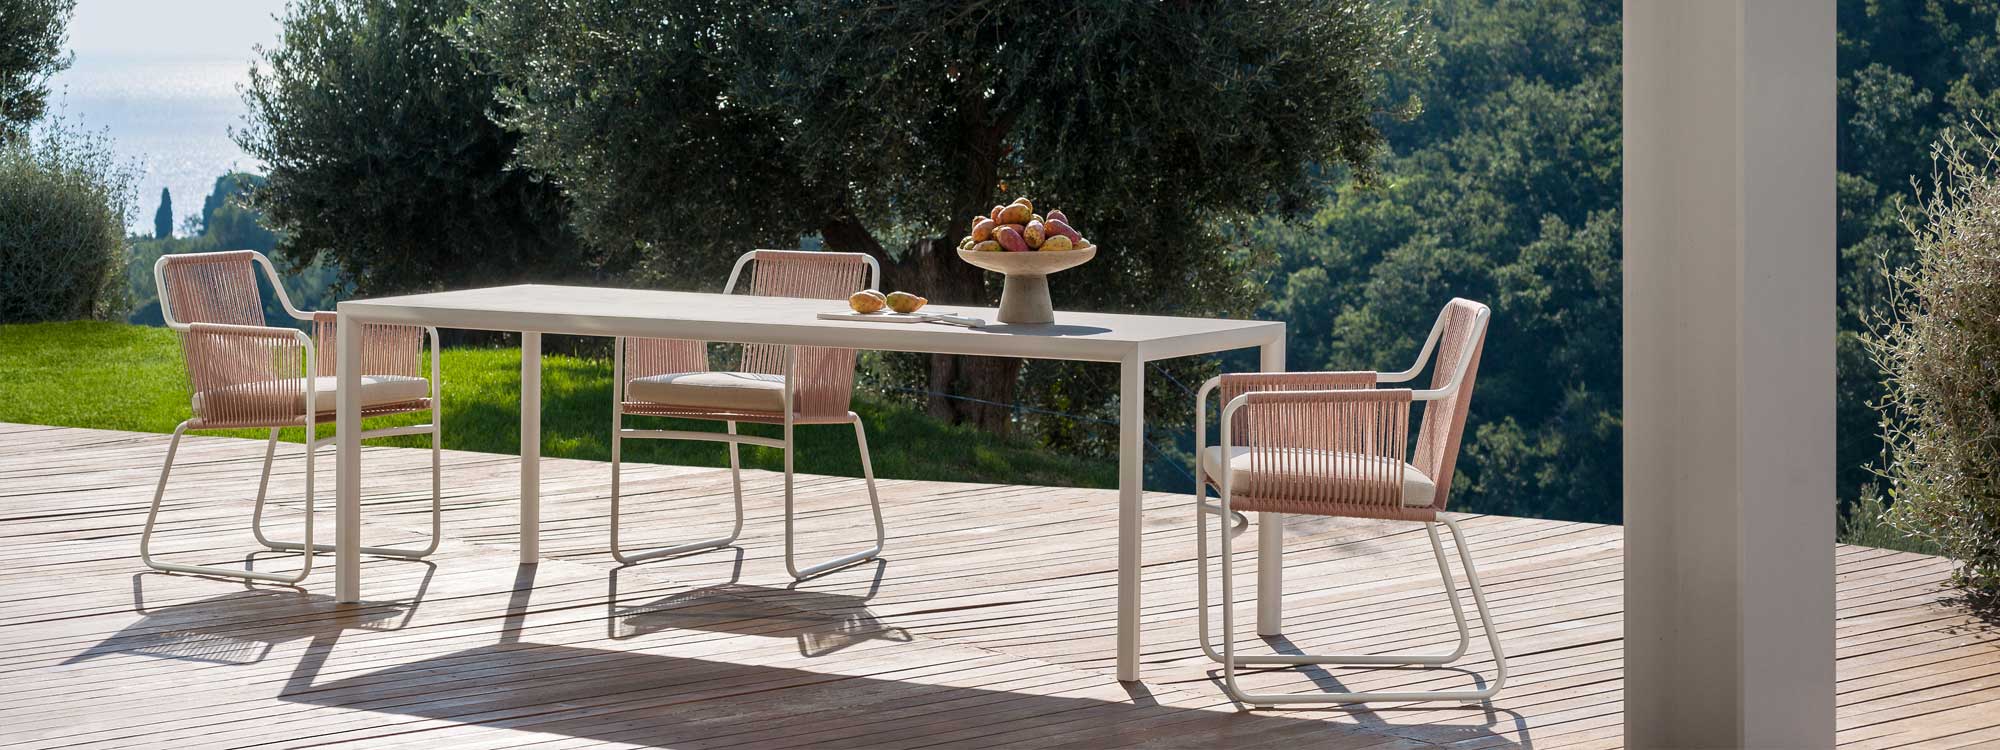 Image of milk colored Plein Air garden table and Harp garden chairs by RODA on sunny terrace